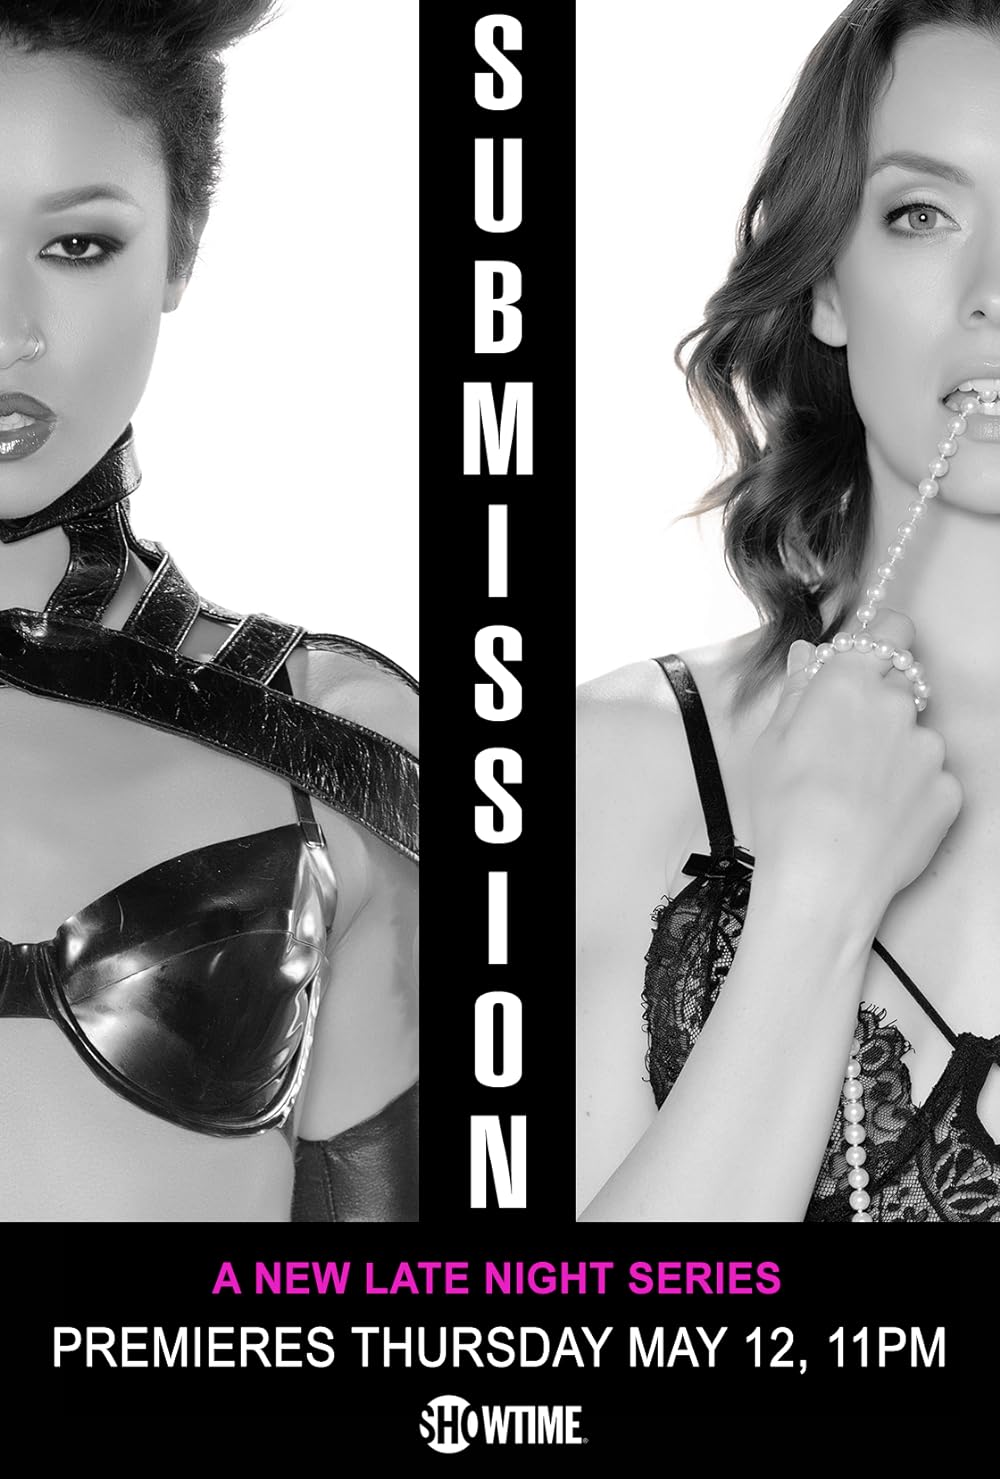 bina atif recommends submission season 2 online pic